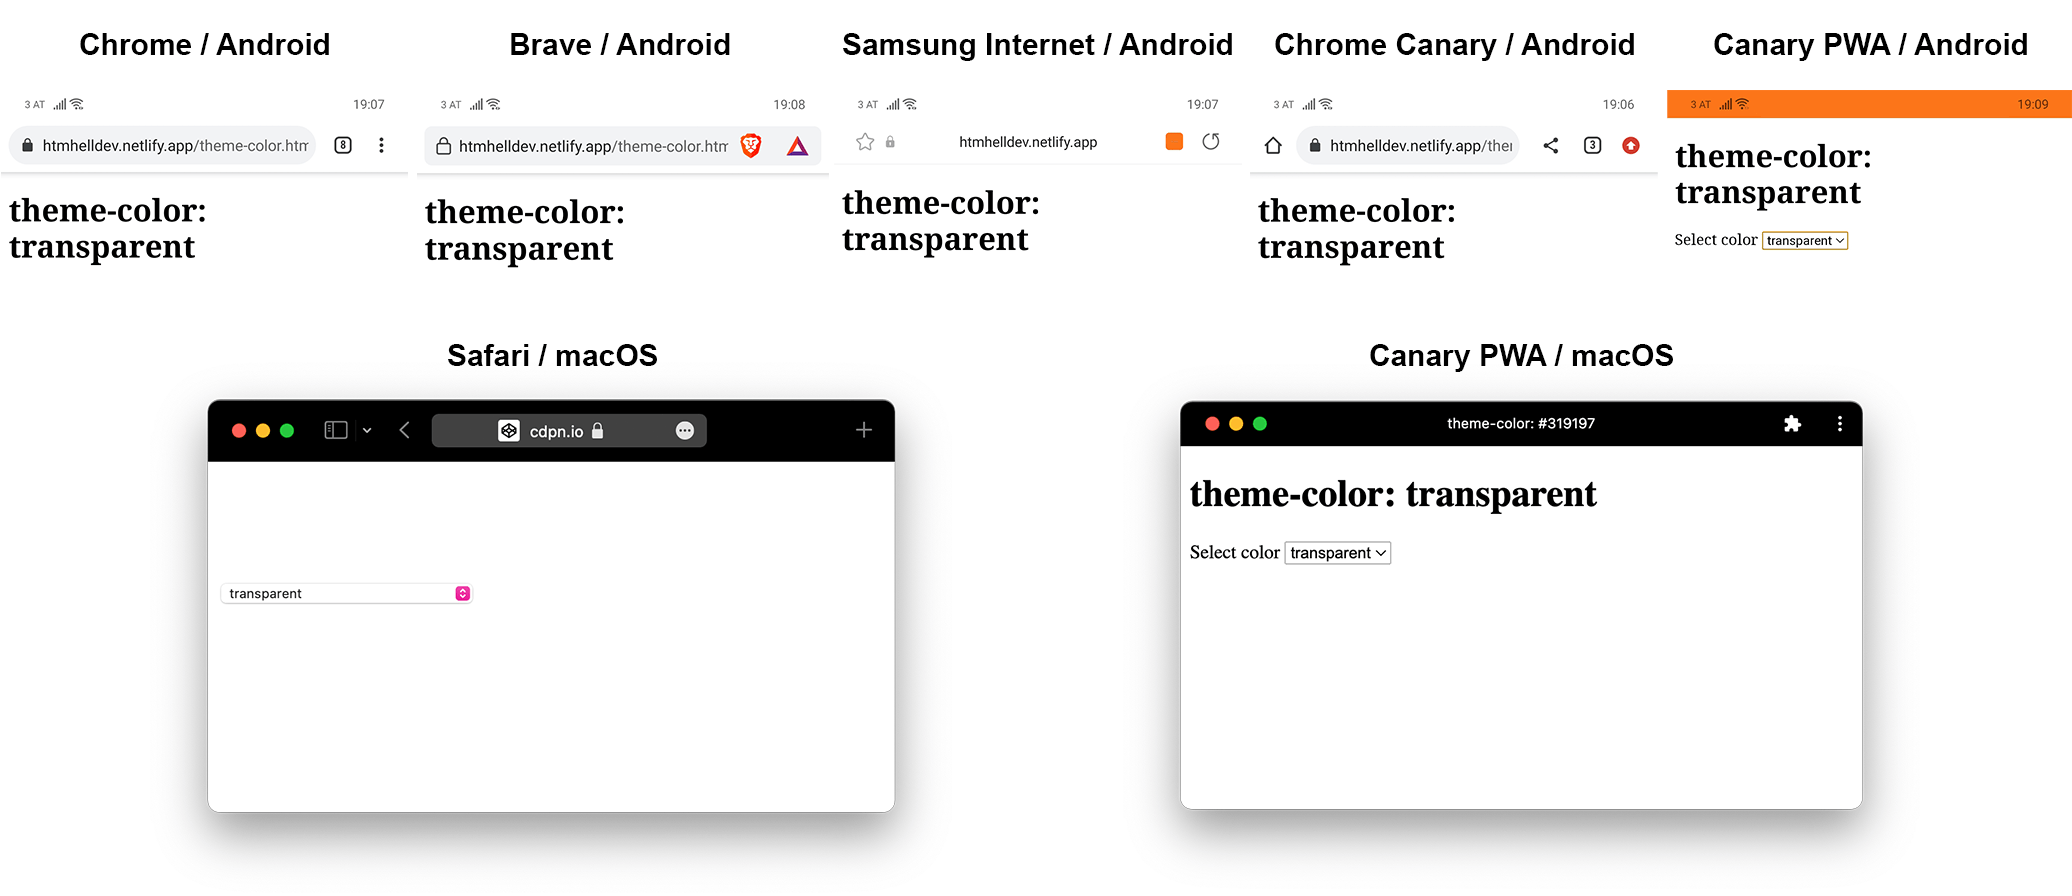 Examples of the same white webpage with either white or dark headers with the browser vendor labeled above each one.